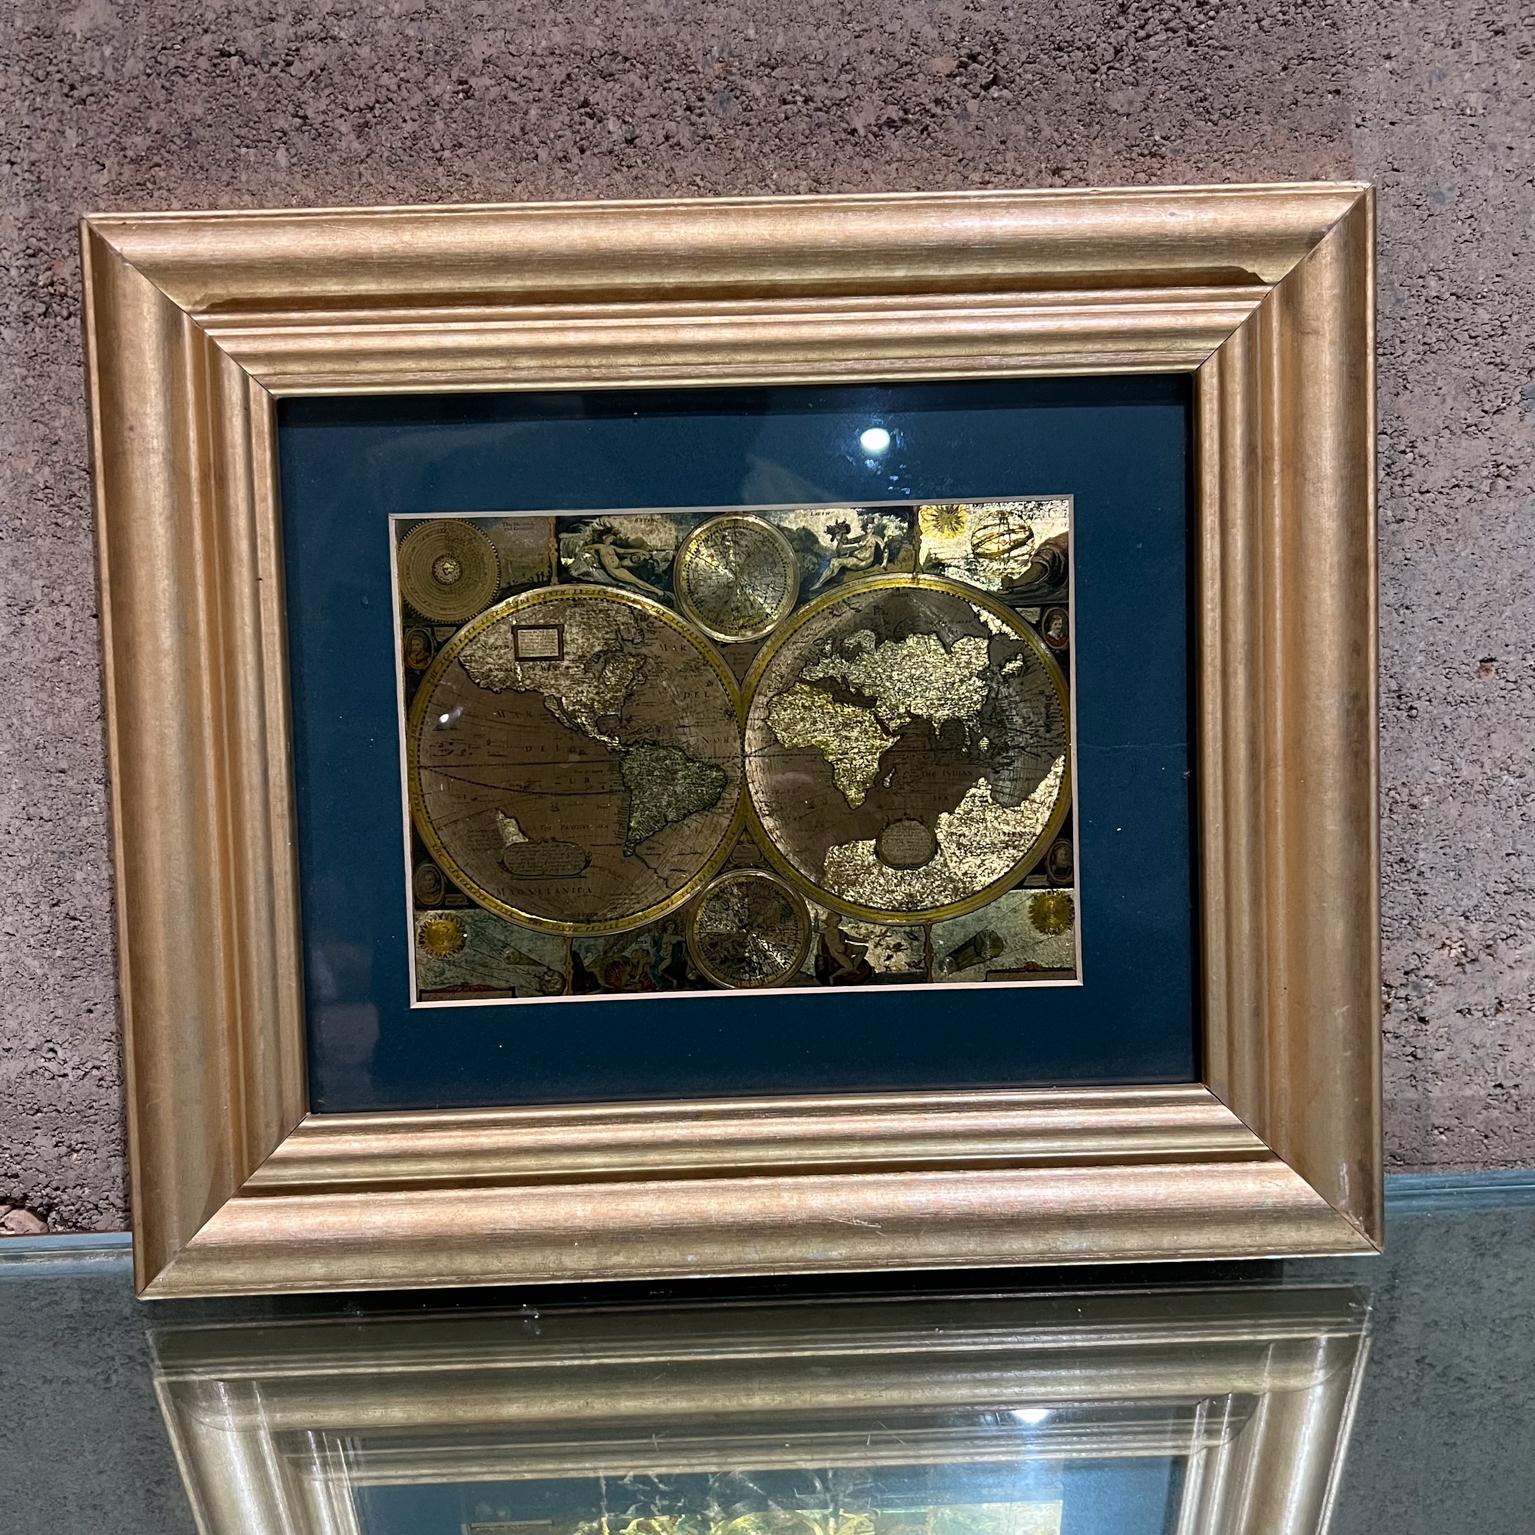 Late 20th Century Gold Foil Ancient World Map Double Hemisphere
Gold Foil Old World Framed Map
information on reverse of the print.
Original vintage condition.
Wood frame and glass in good shape.
Print world 13.5 w x 11.5 d x 1 thick
Review images.